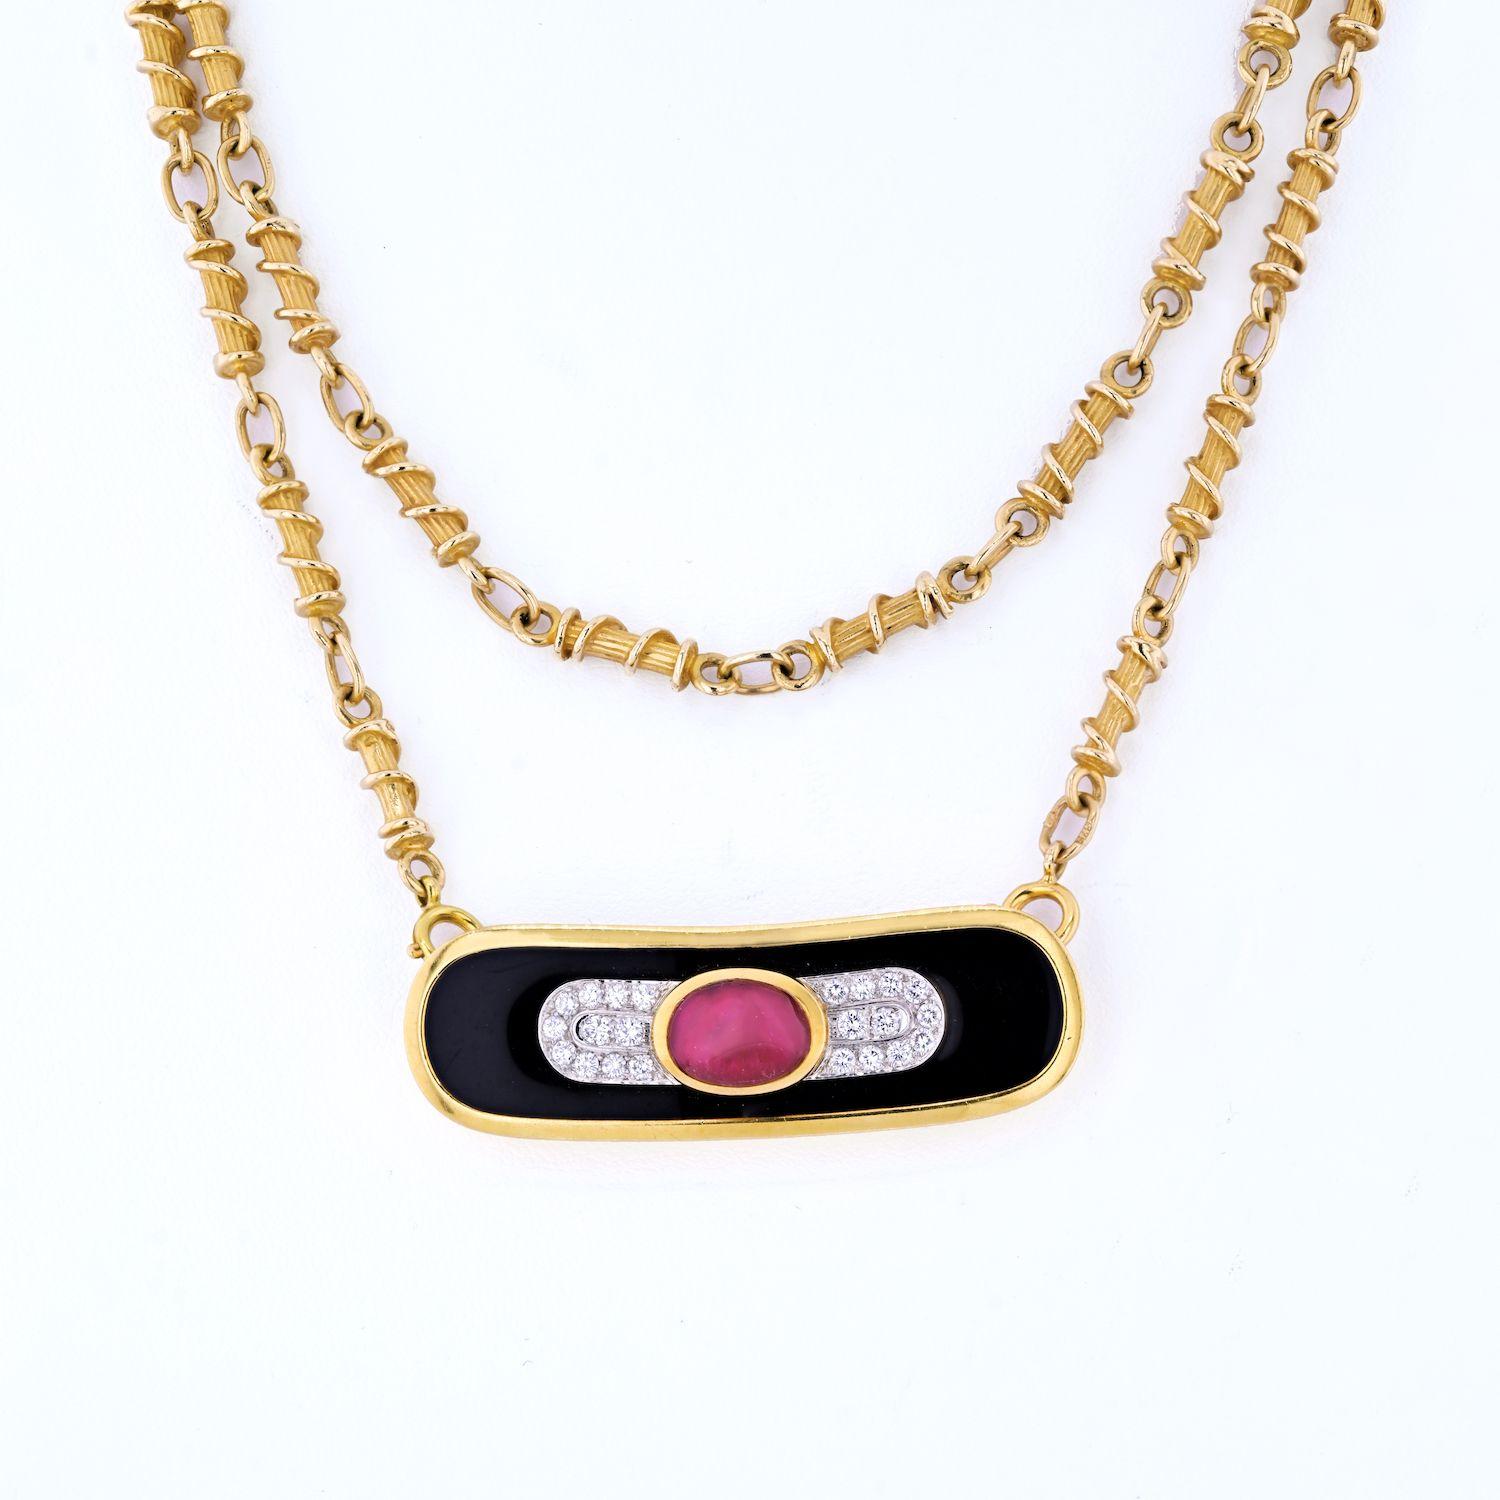 RUBY, DIAMOND AND LACQUER PENDANT, DAVID WEBB Cabochon ruby, circular-cut diamonds, black lacquer, platinum and gold, pendant 5.6 cm, necklace 86.0 cm, together with a fancy-link necklace, pendant signed Webb, black David Webb pouch.
Length: 36